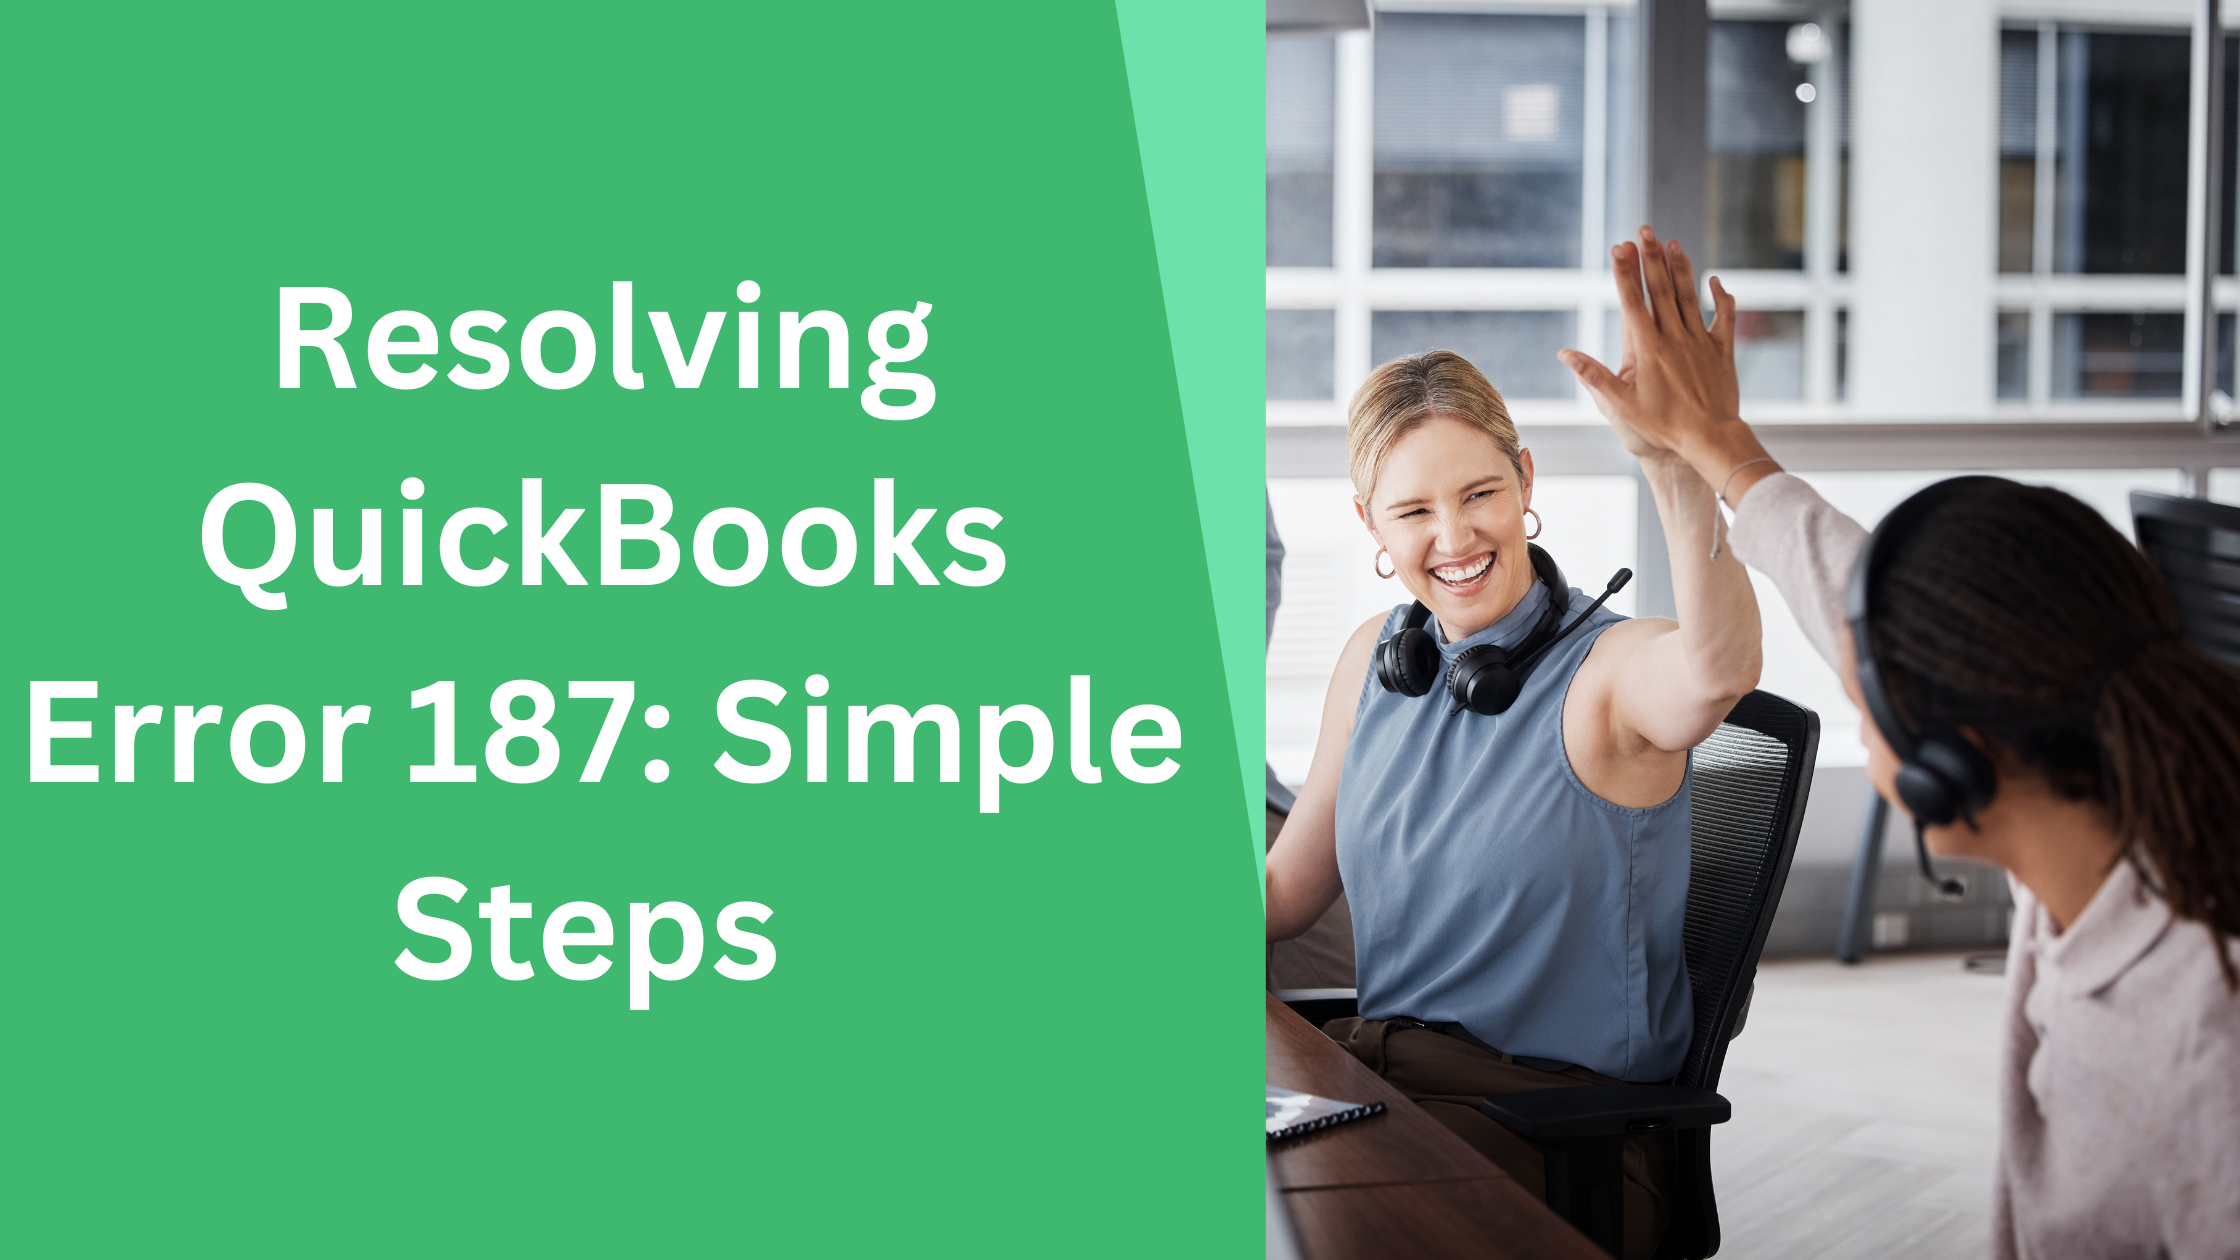 Resolving QuickBooks Error 187: Simple Steps to Regain Access to Your Account